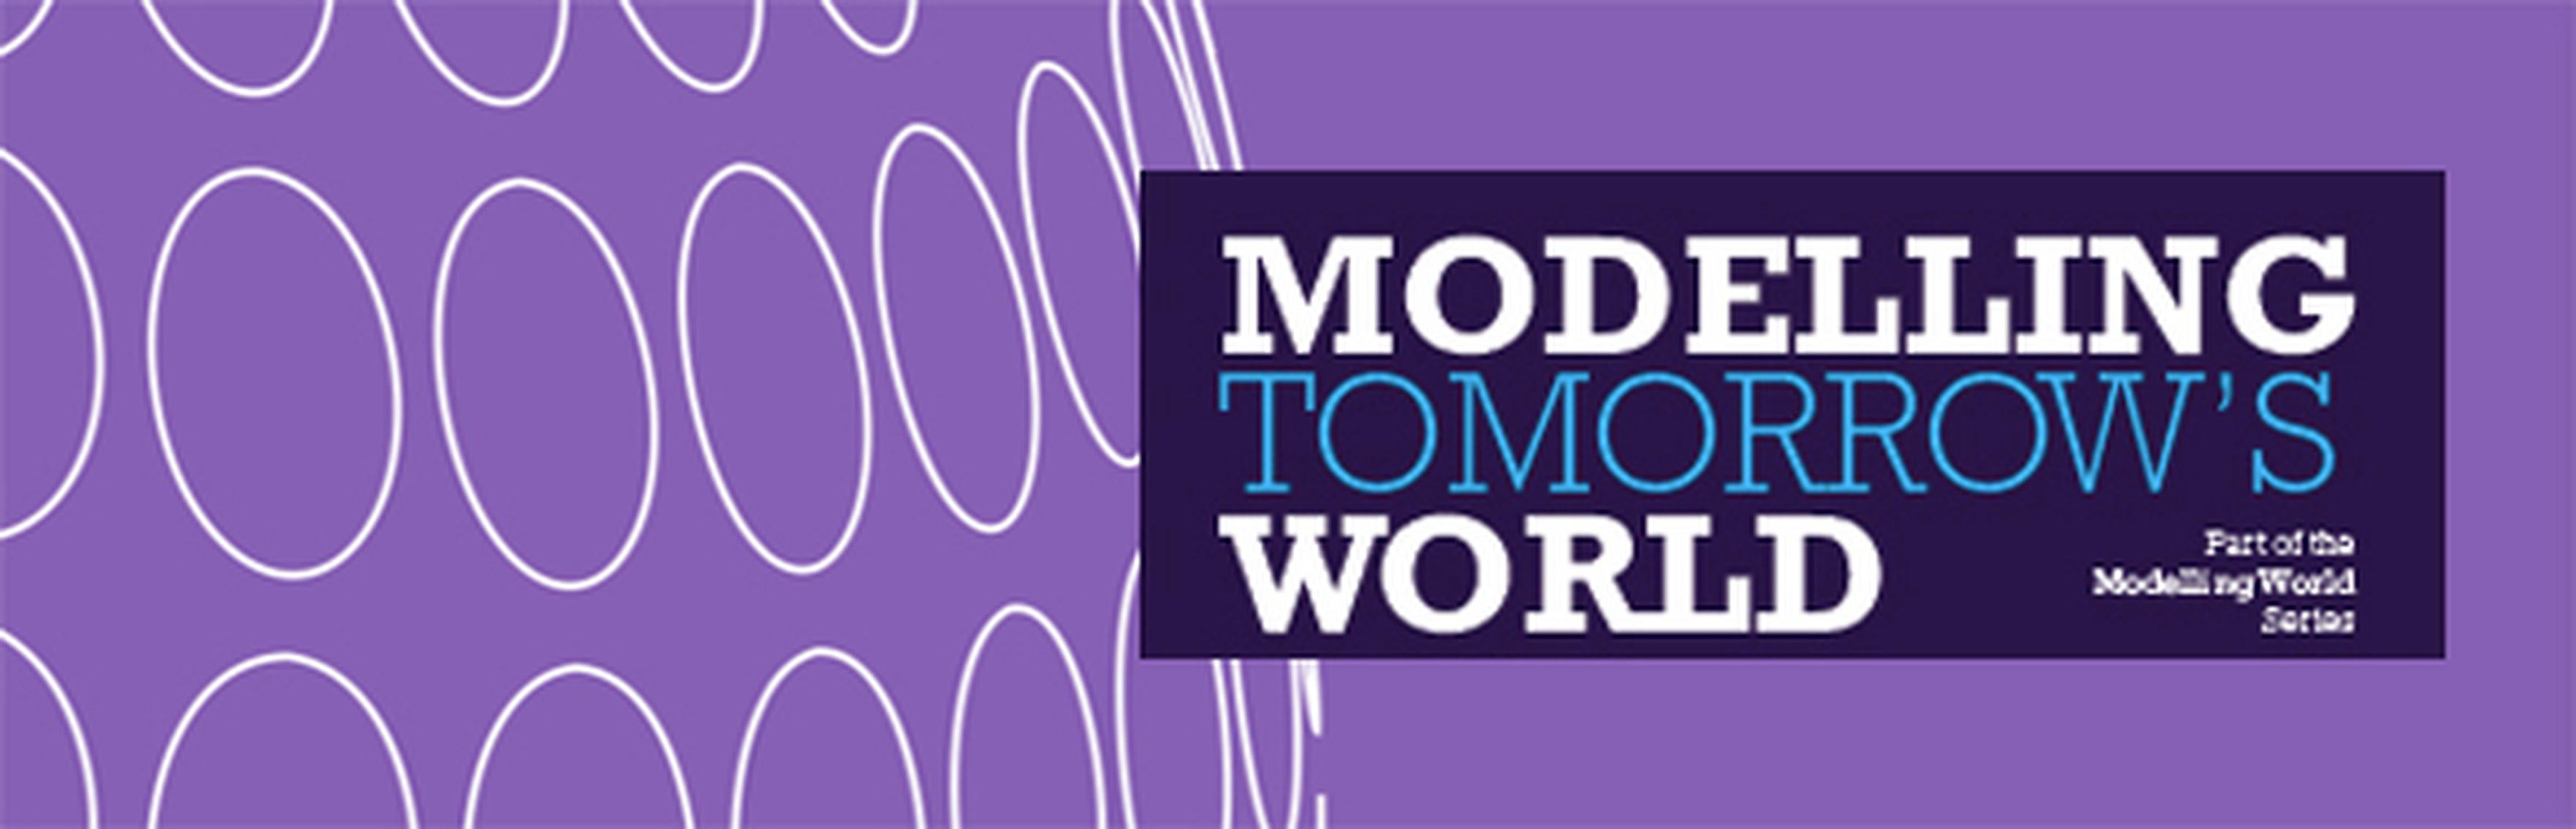 Modelling Tomorrow's World: new perspectives